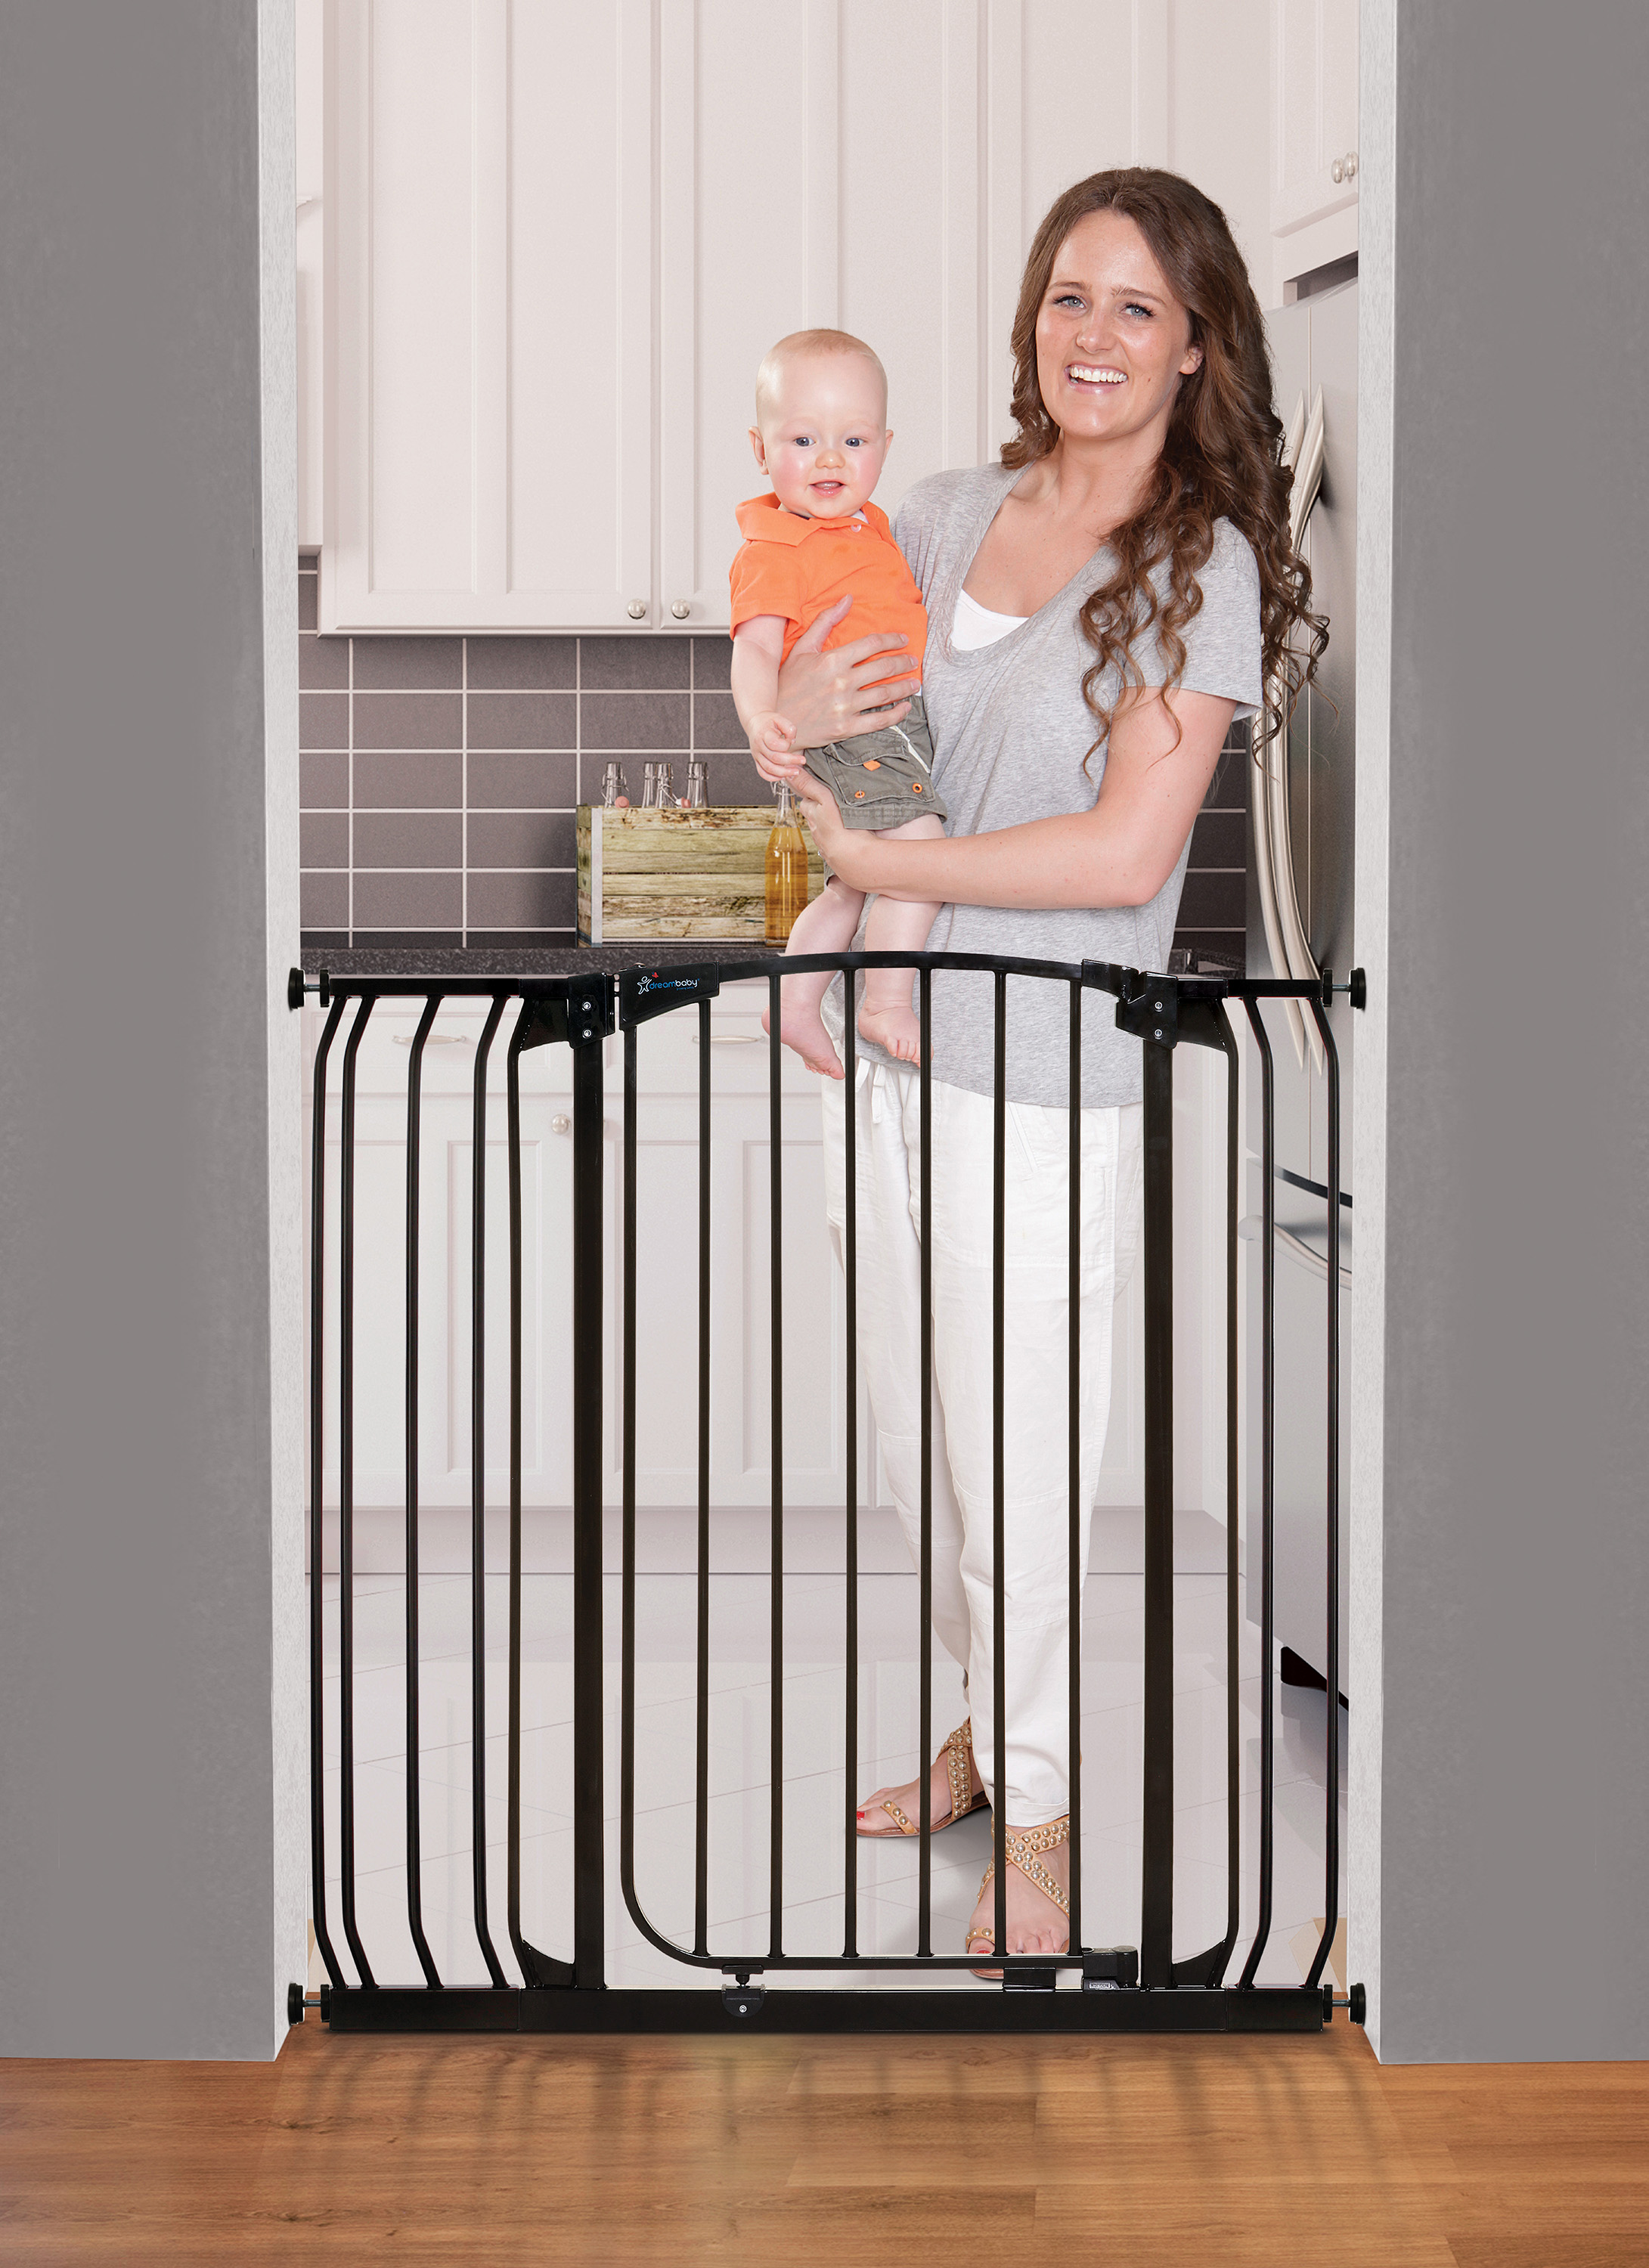 Dreambaby Chelsea Tall Auto Close Stay Open Gate-Finish:Black - image 1 of 7